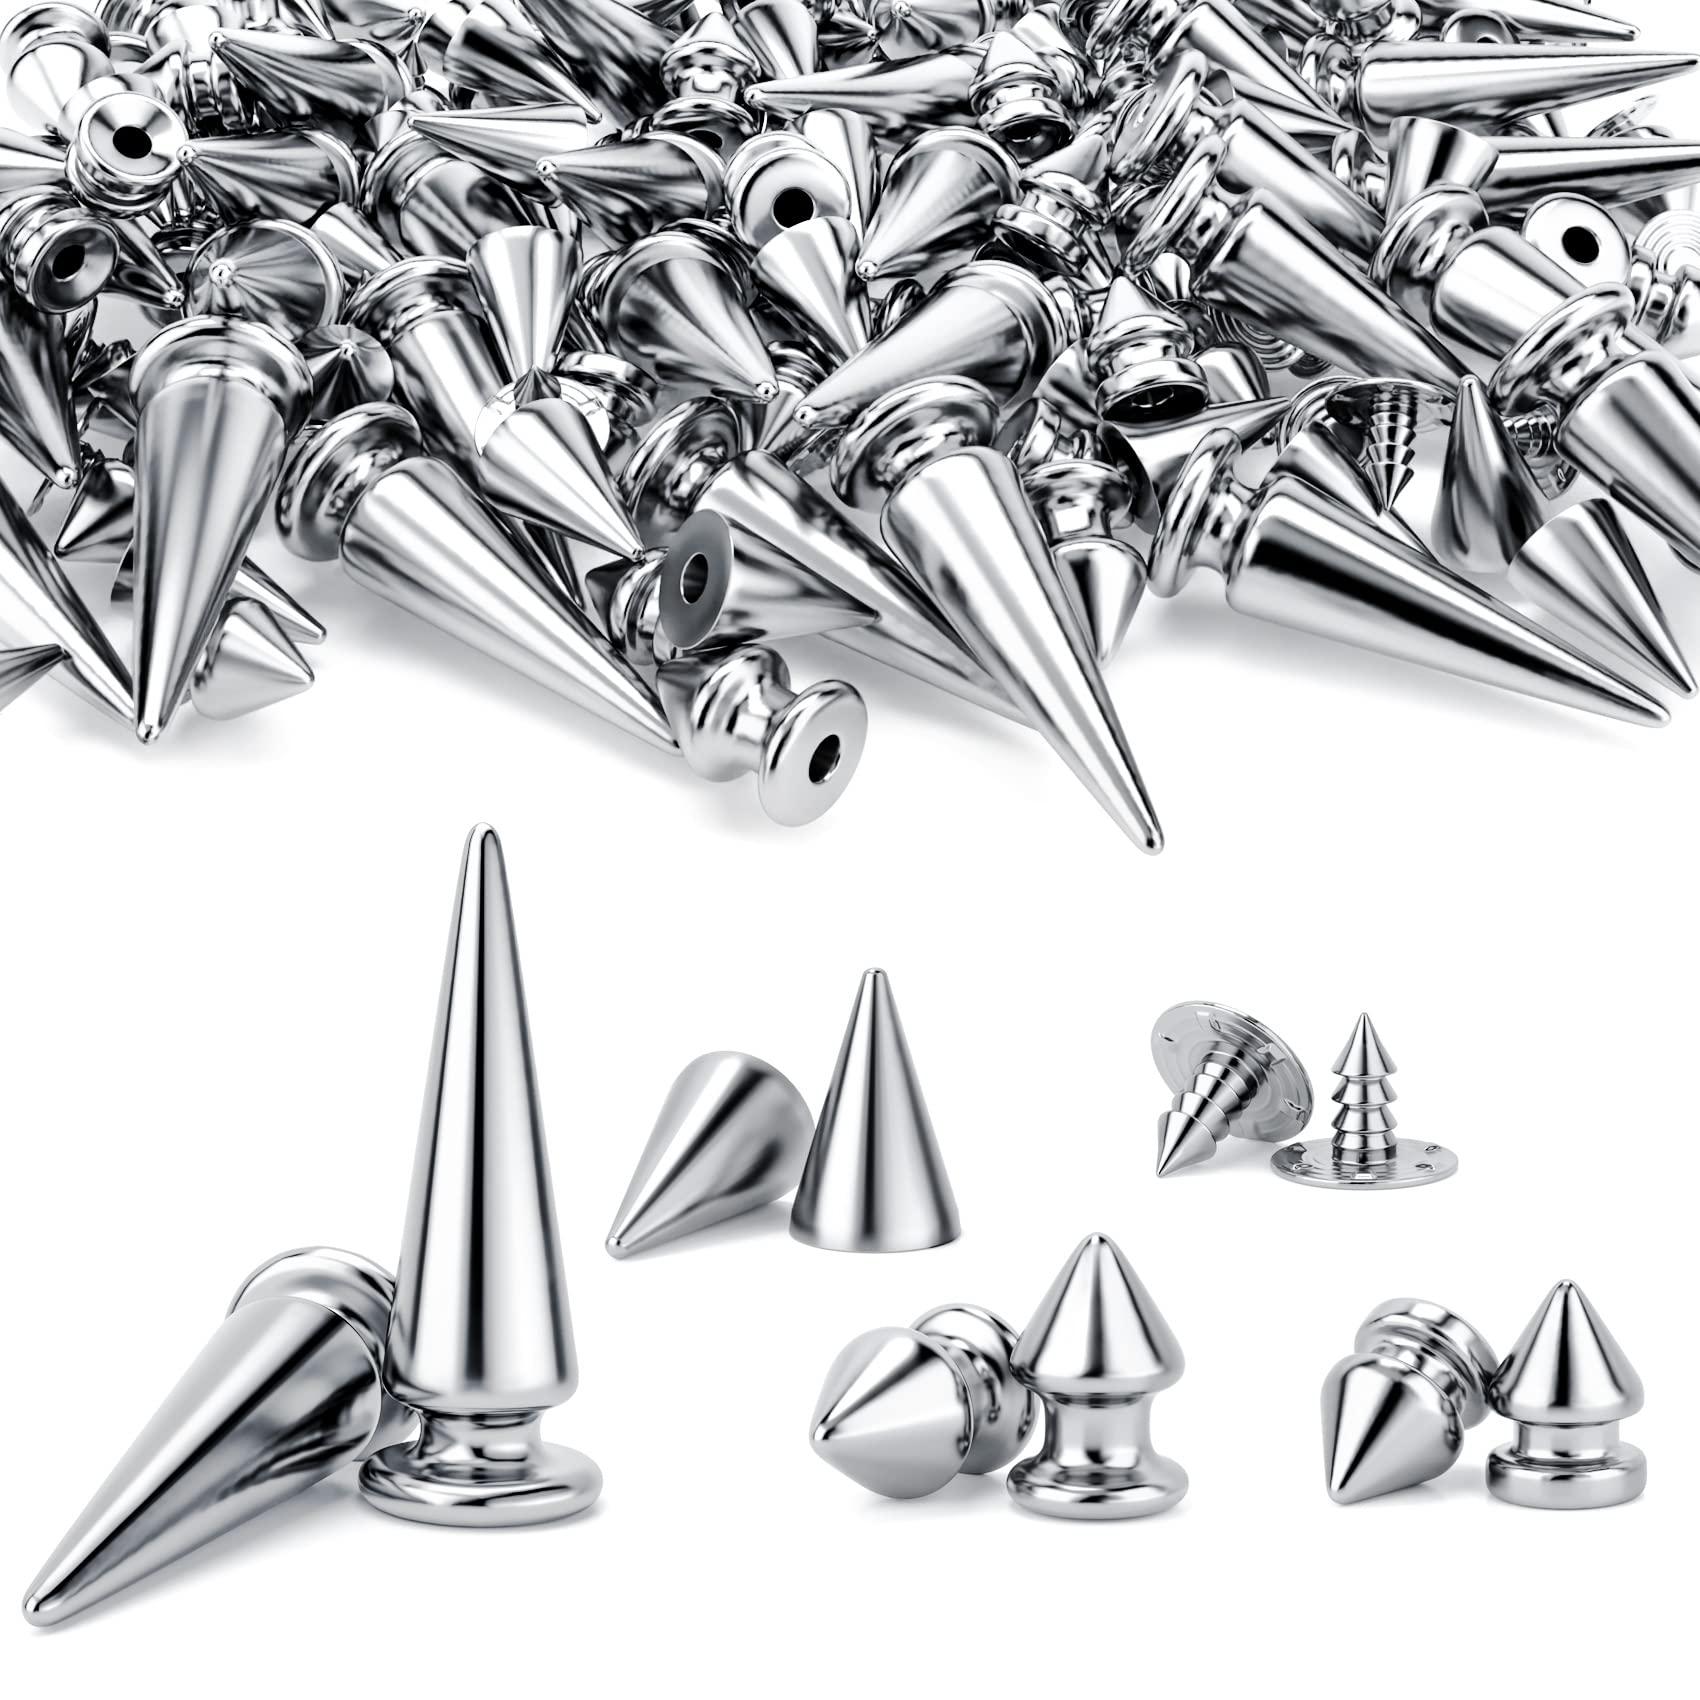 GDFYMI Spikes for Clothing, 80 Sets Studs and Spikes, Punk Spikes Jacket  Studs for Clothing, Silver Bullet Spike Cone Studs and Screwback Rivets for